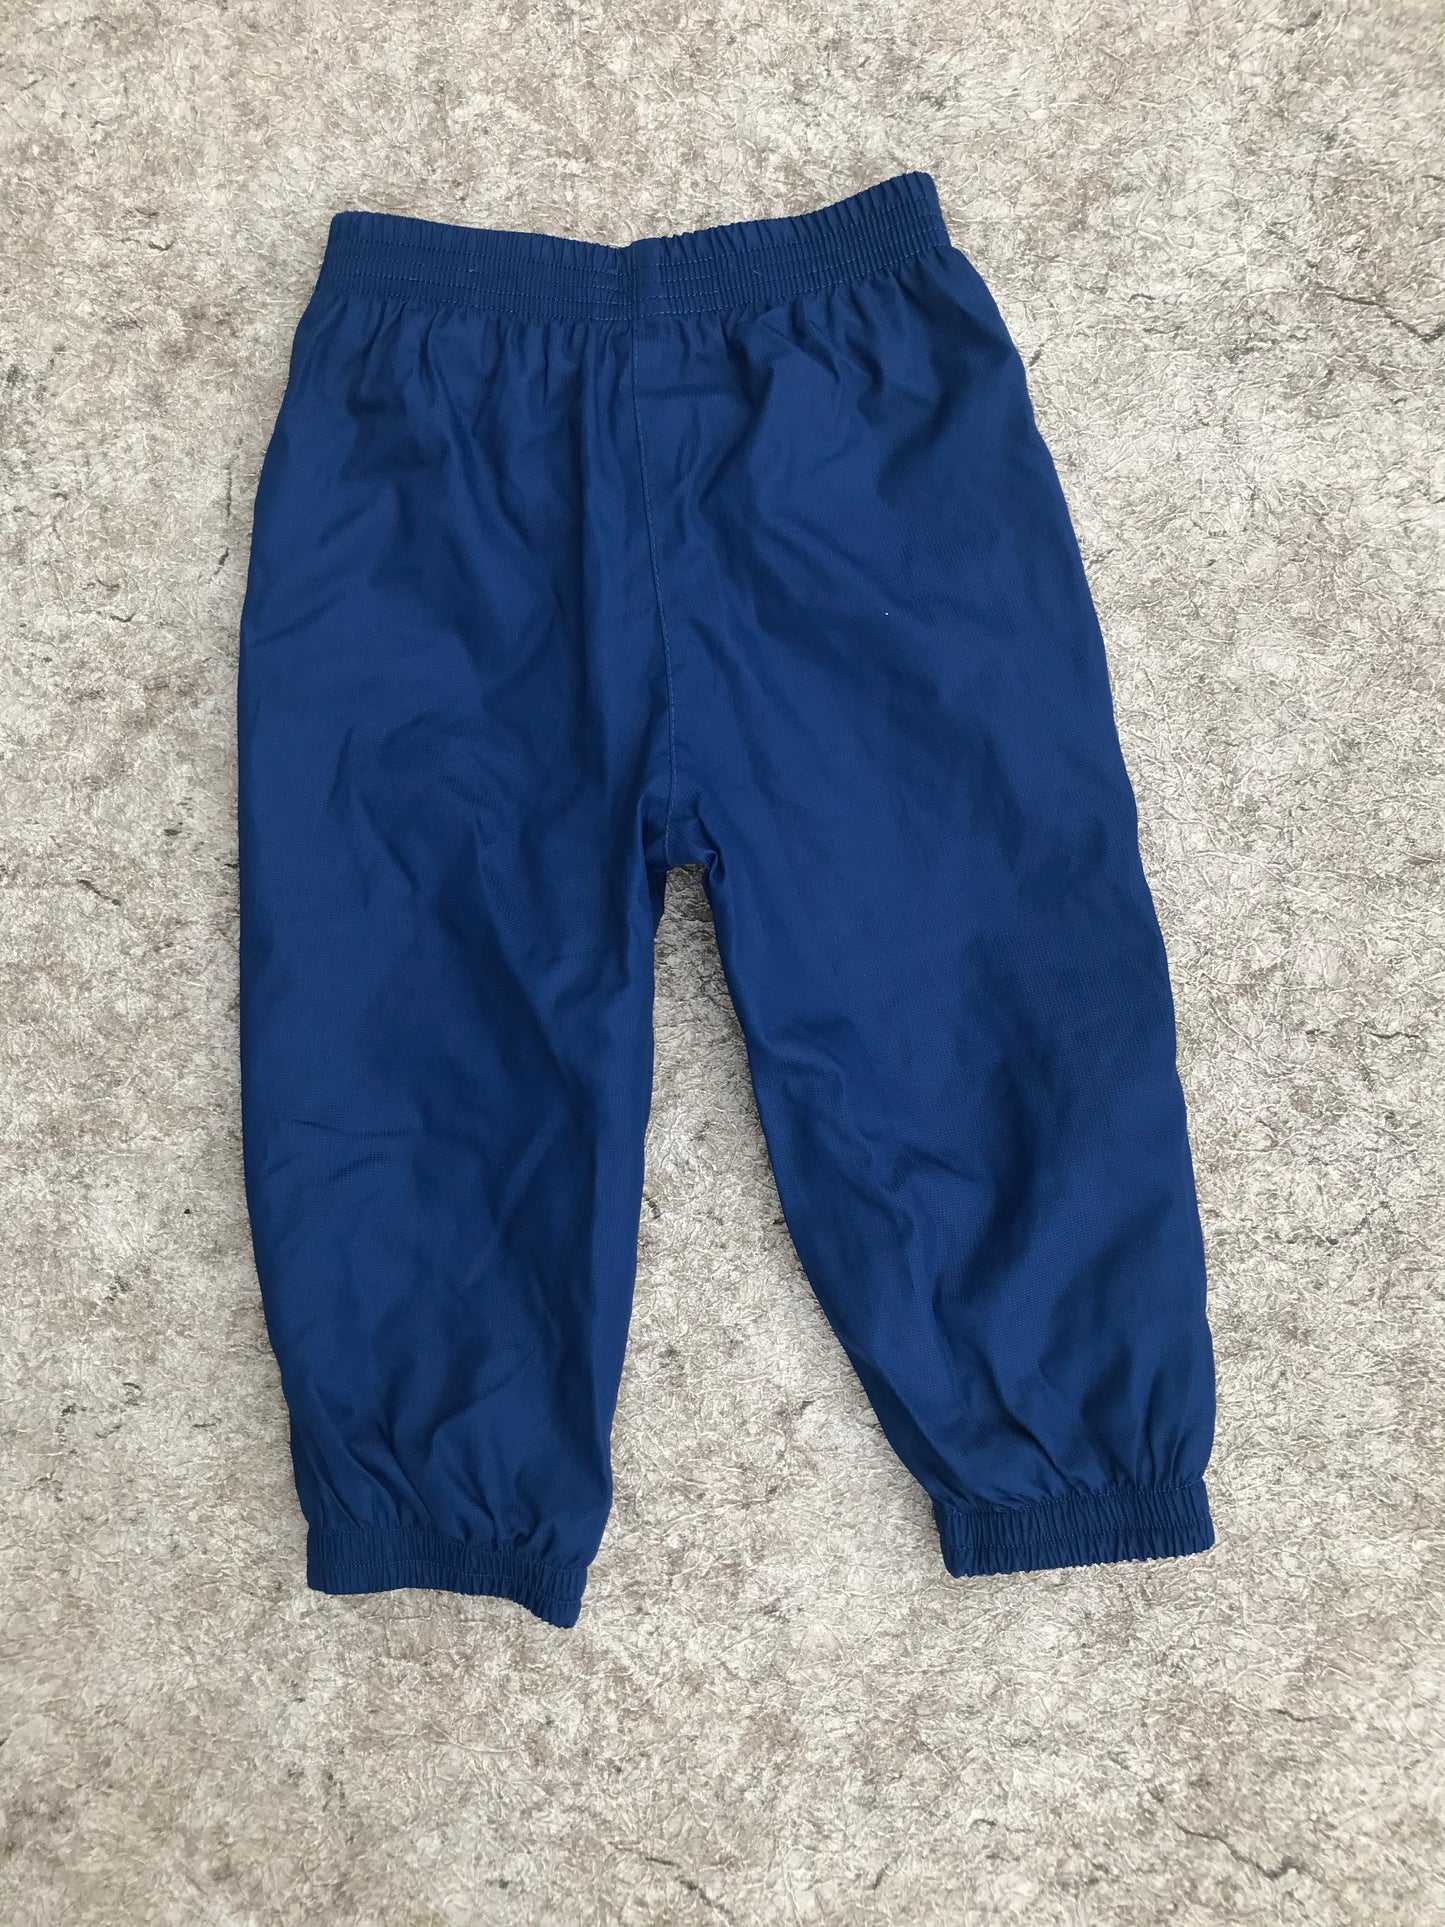 Rain Pants Child Size 24 Month Marine Blue Lined Inside As New